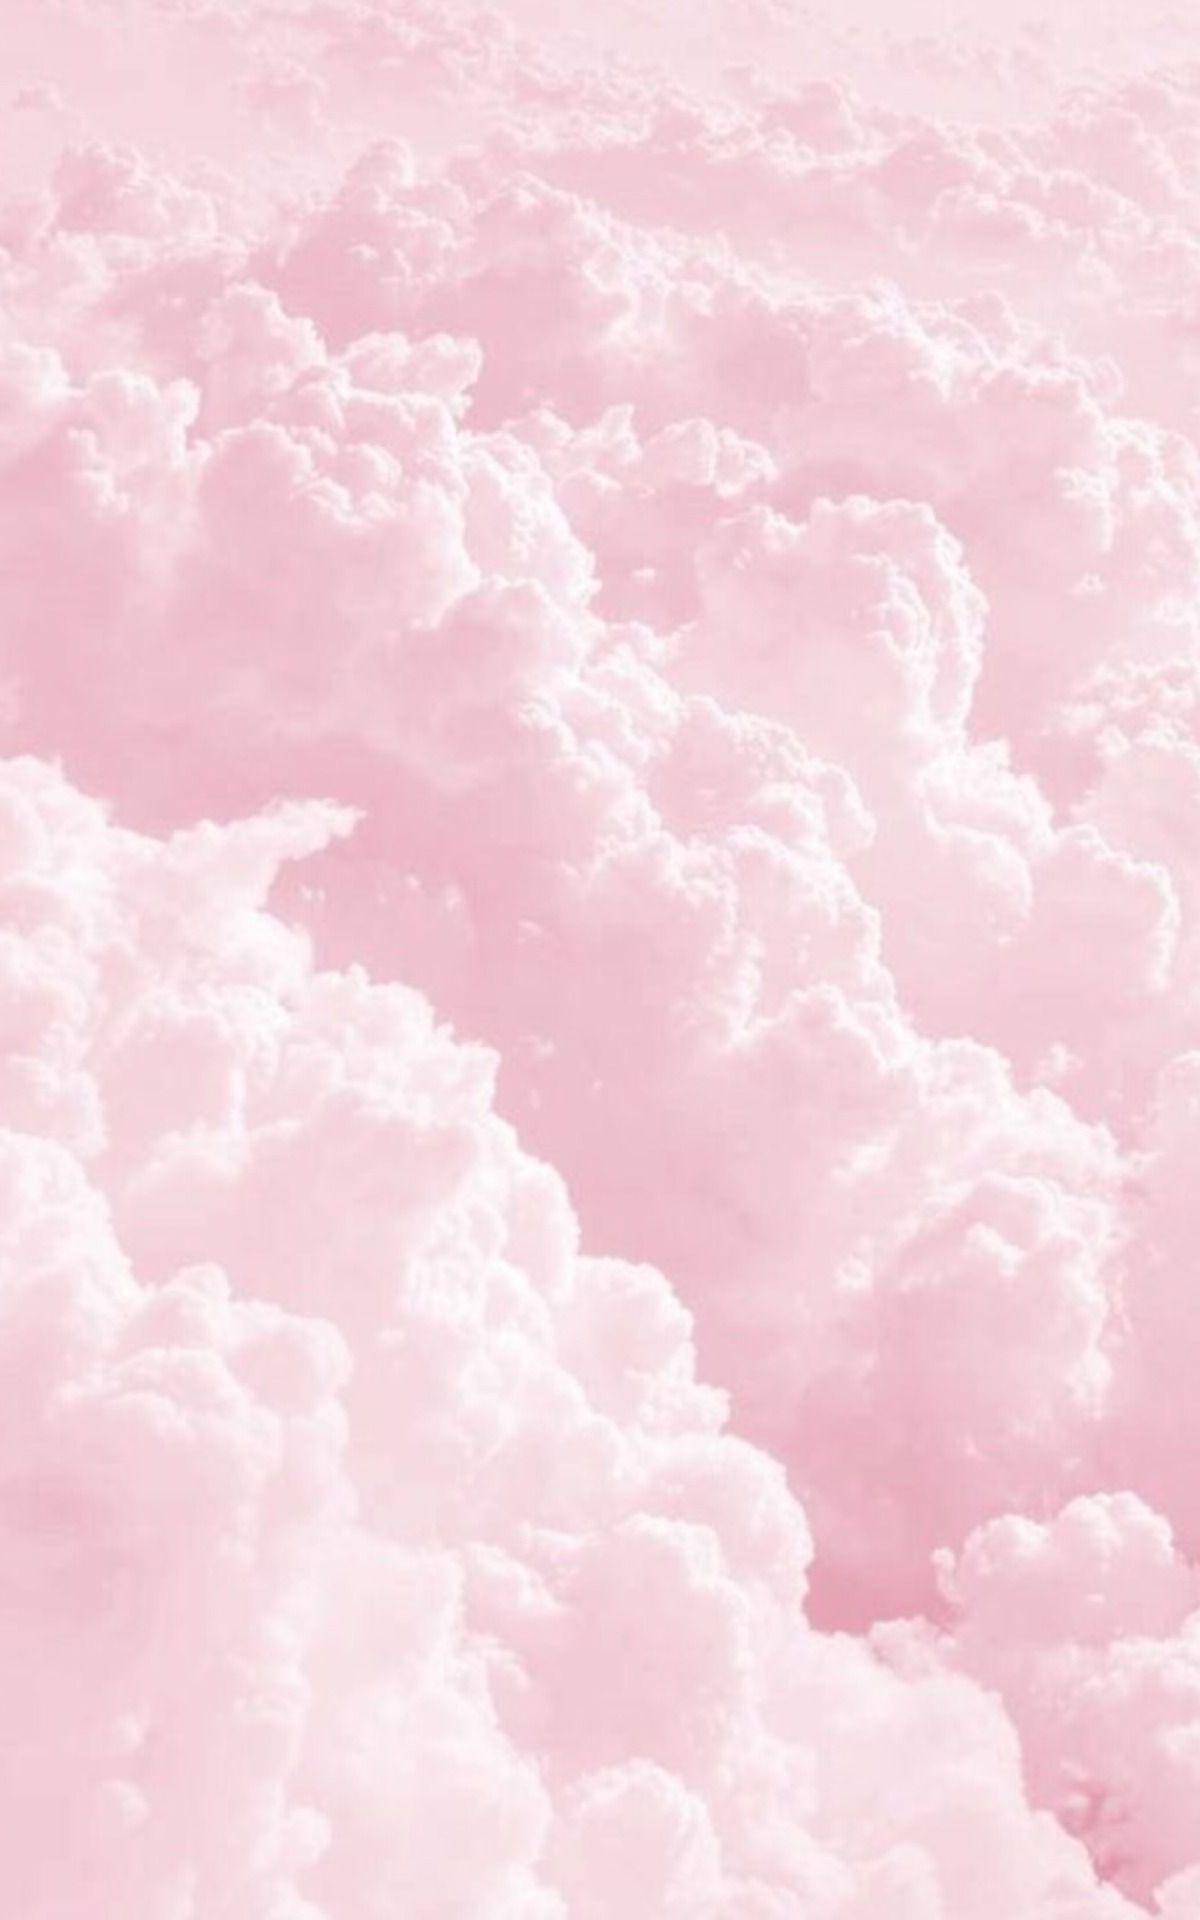 Make your tablet pop with these Pink tablet backgrounds In high resolution